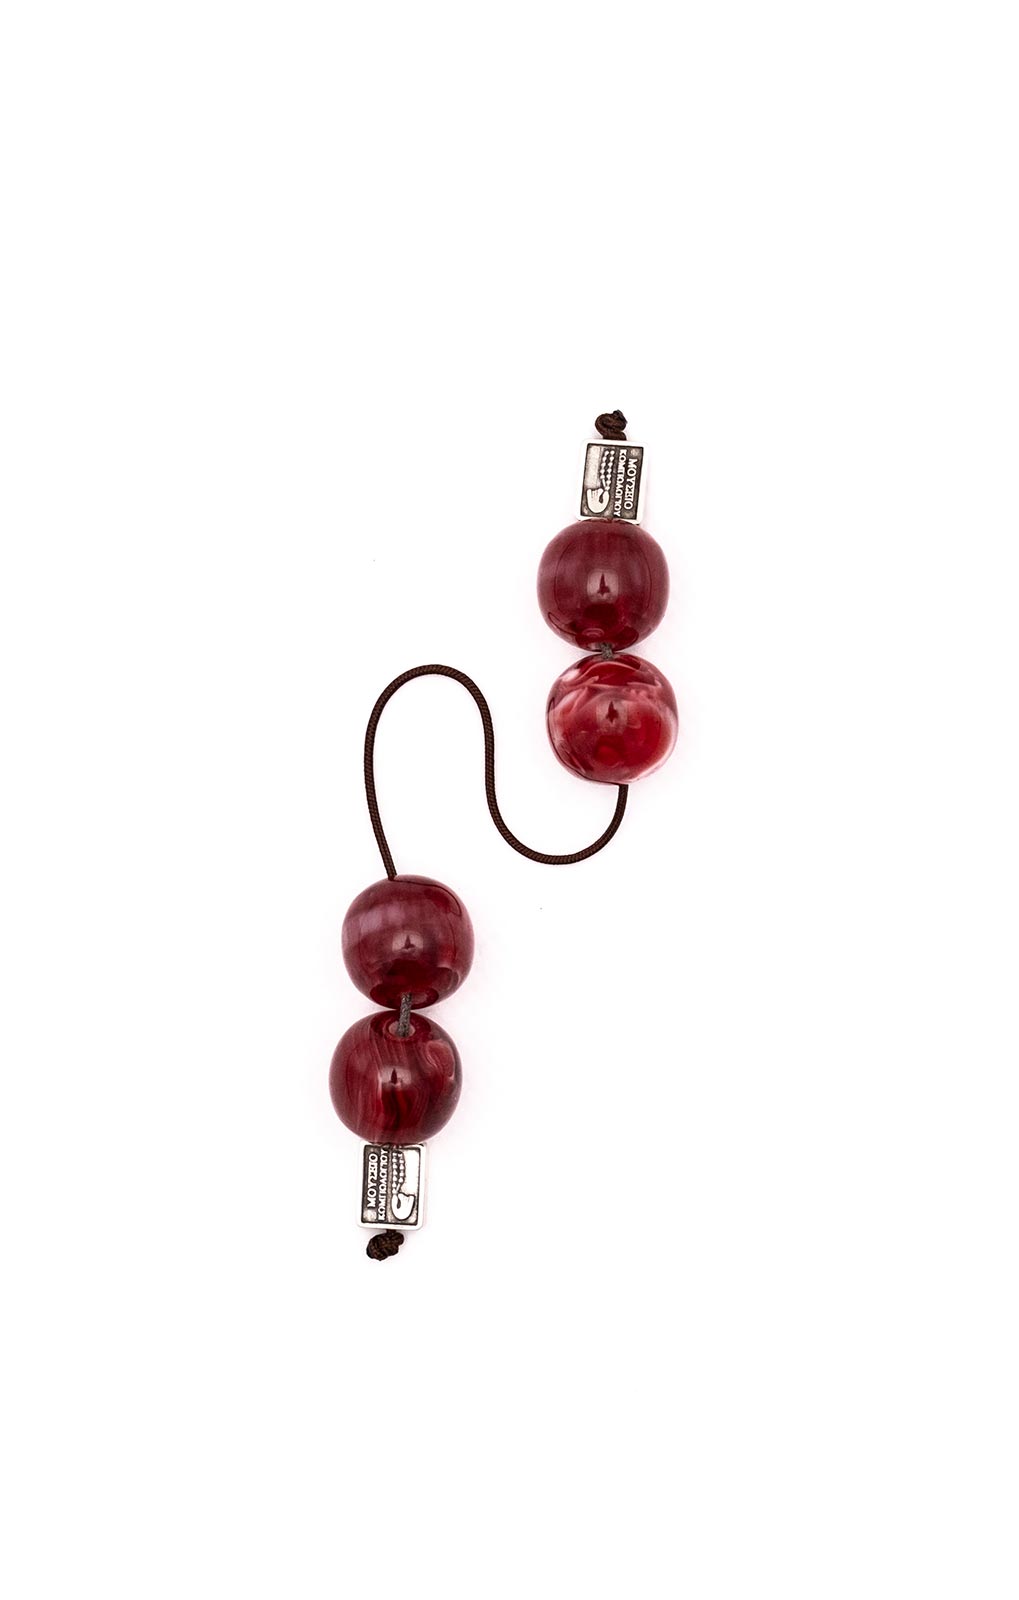 Begleri made of artificial resin (cherry with water-like shades)